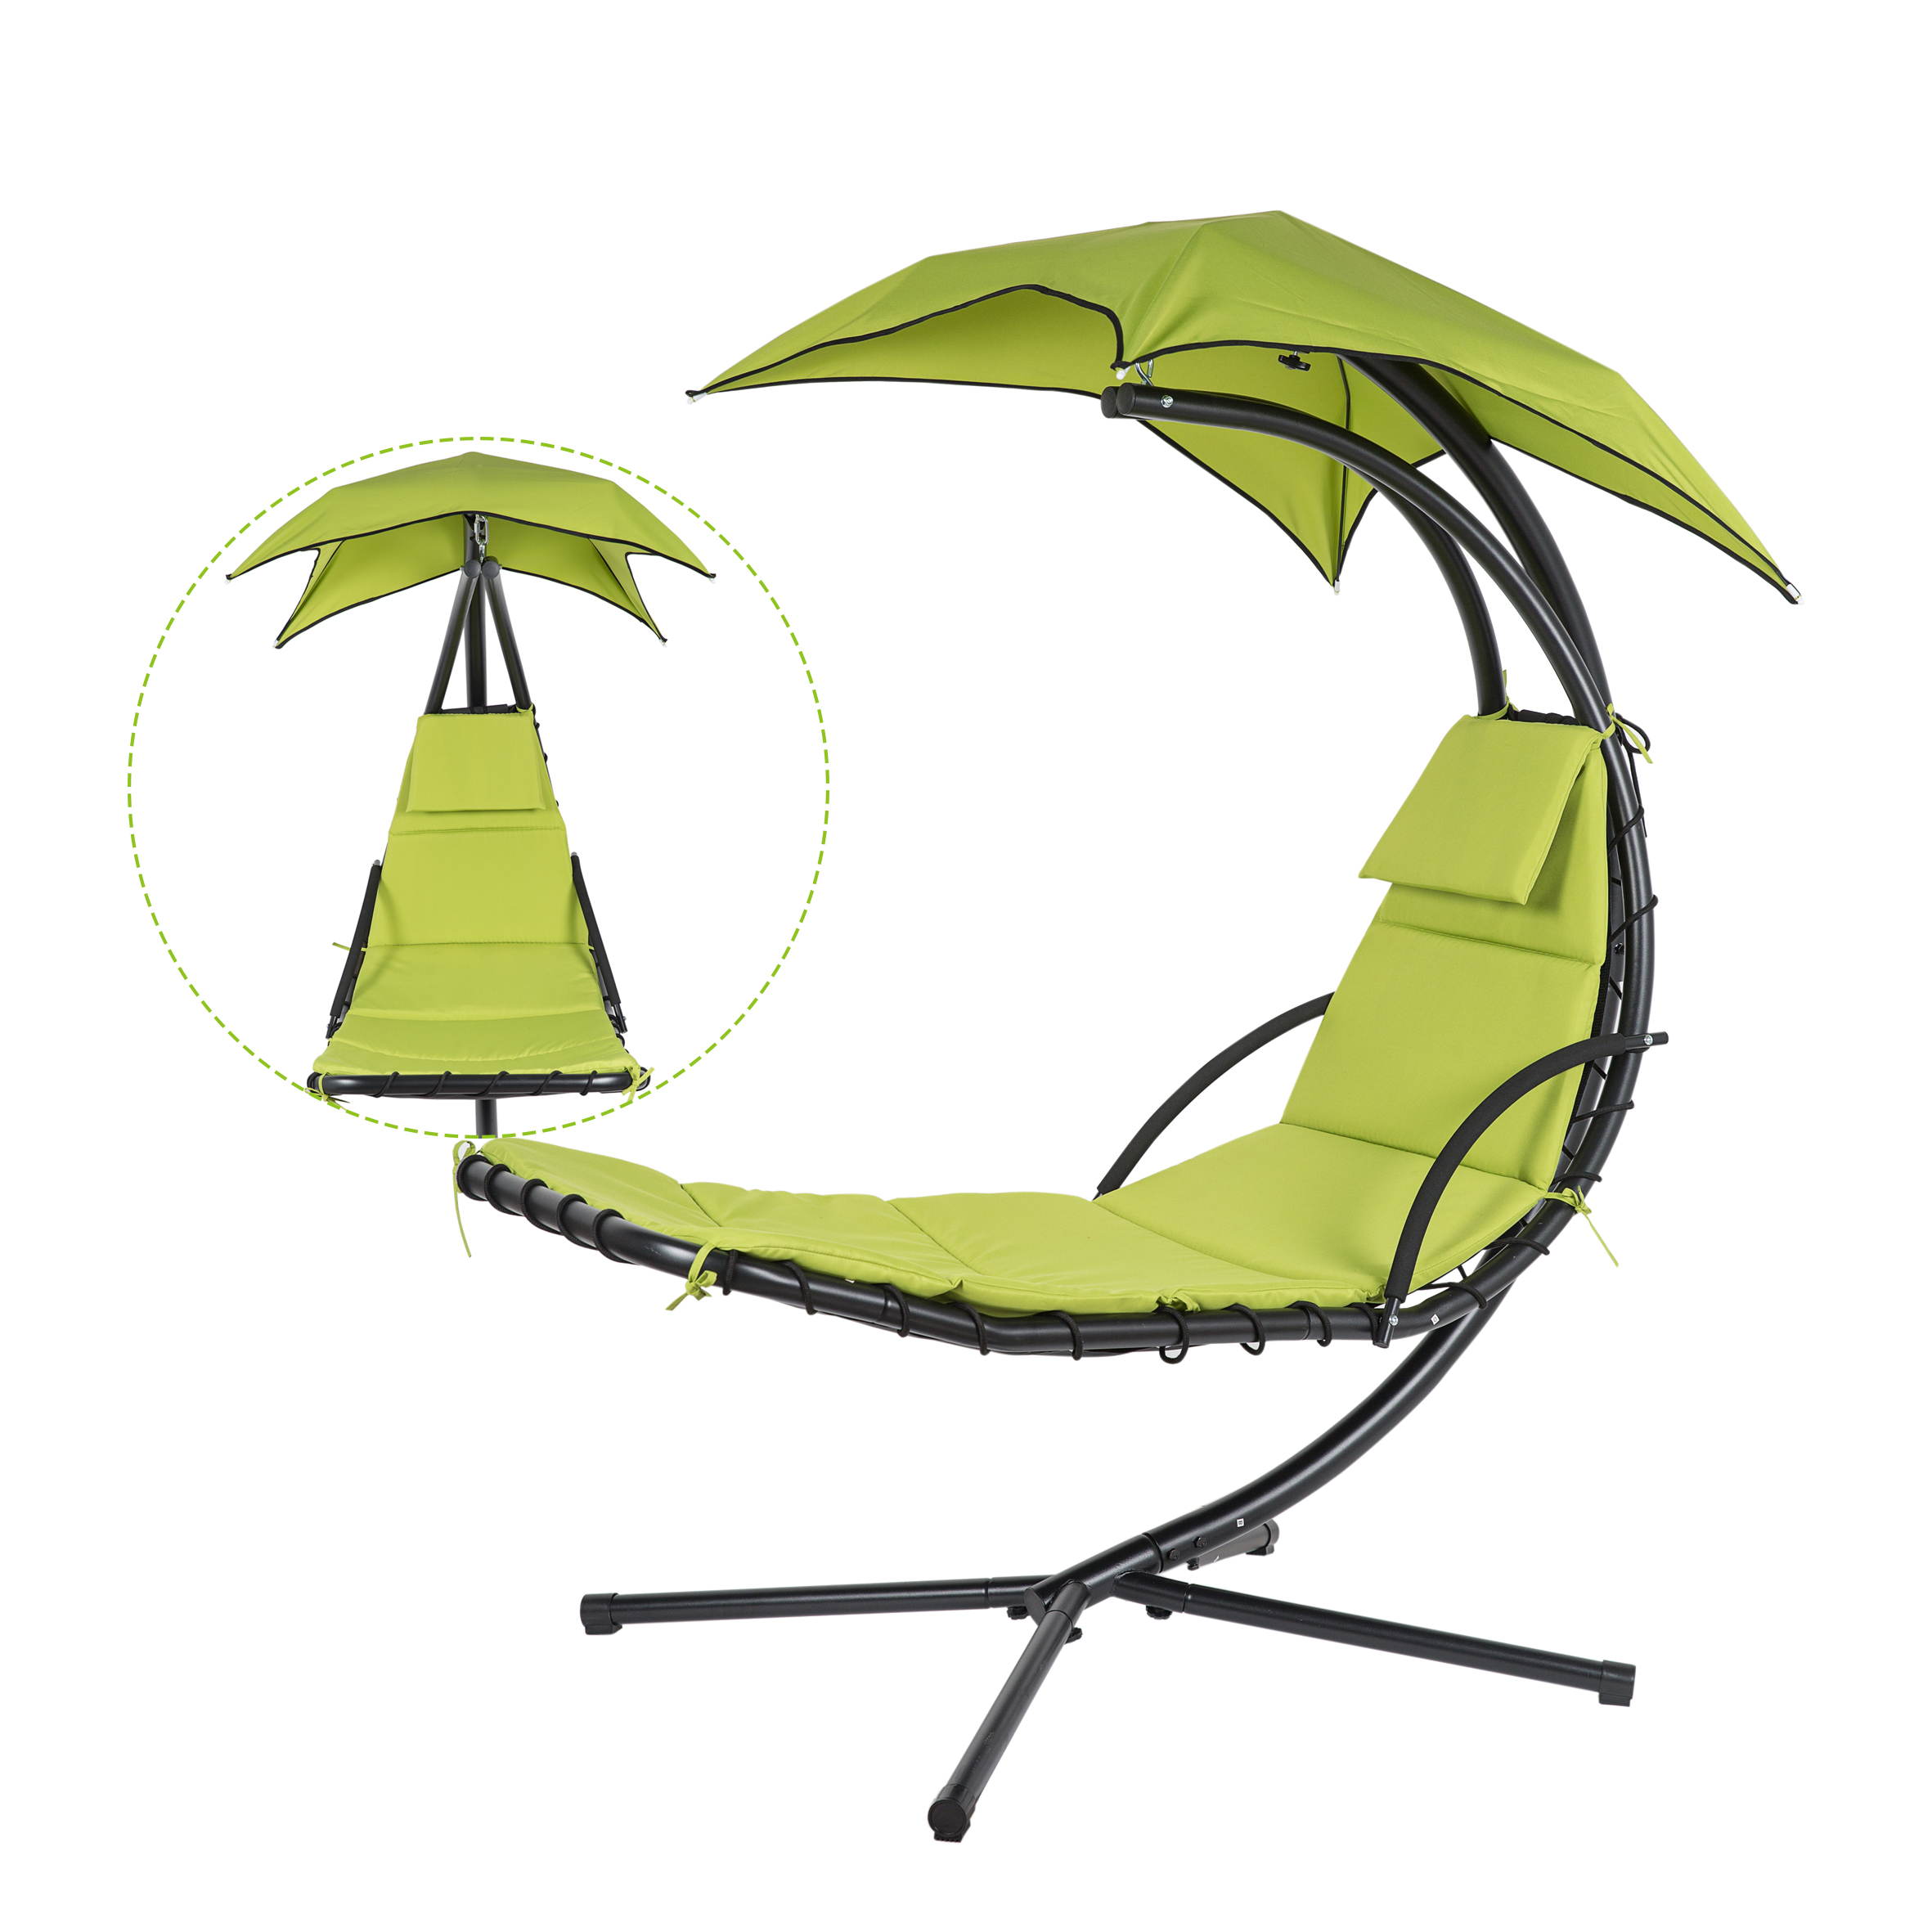 Finefind Hanging Chaise Lounge Chair Floating Swing Hammock Chair Steel Patio, Green - image 4 of 7